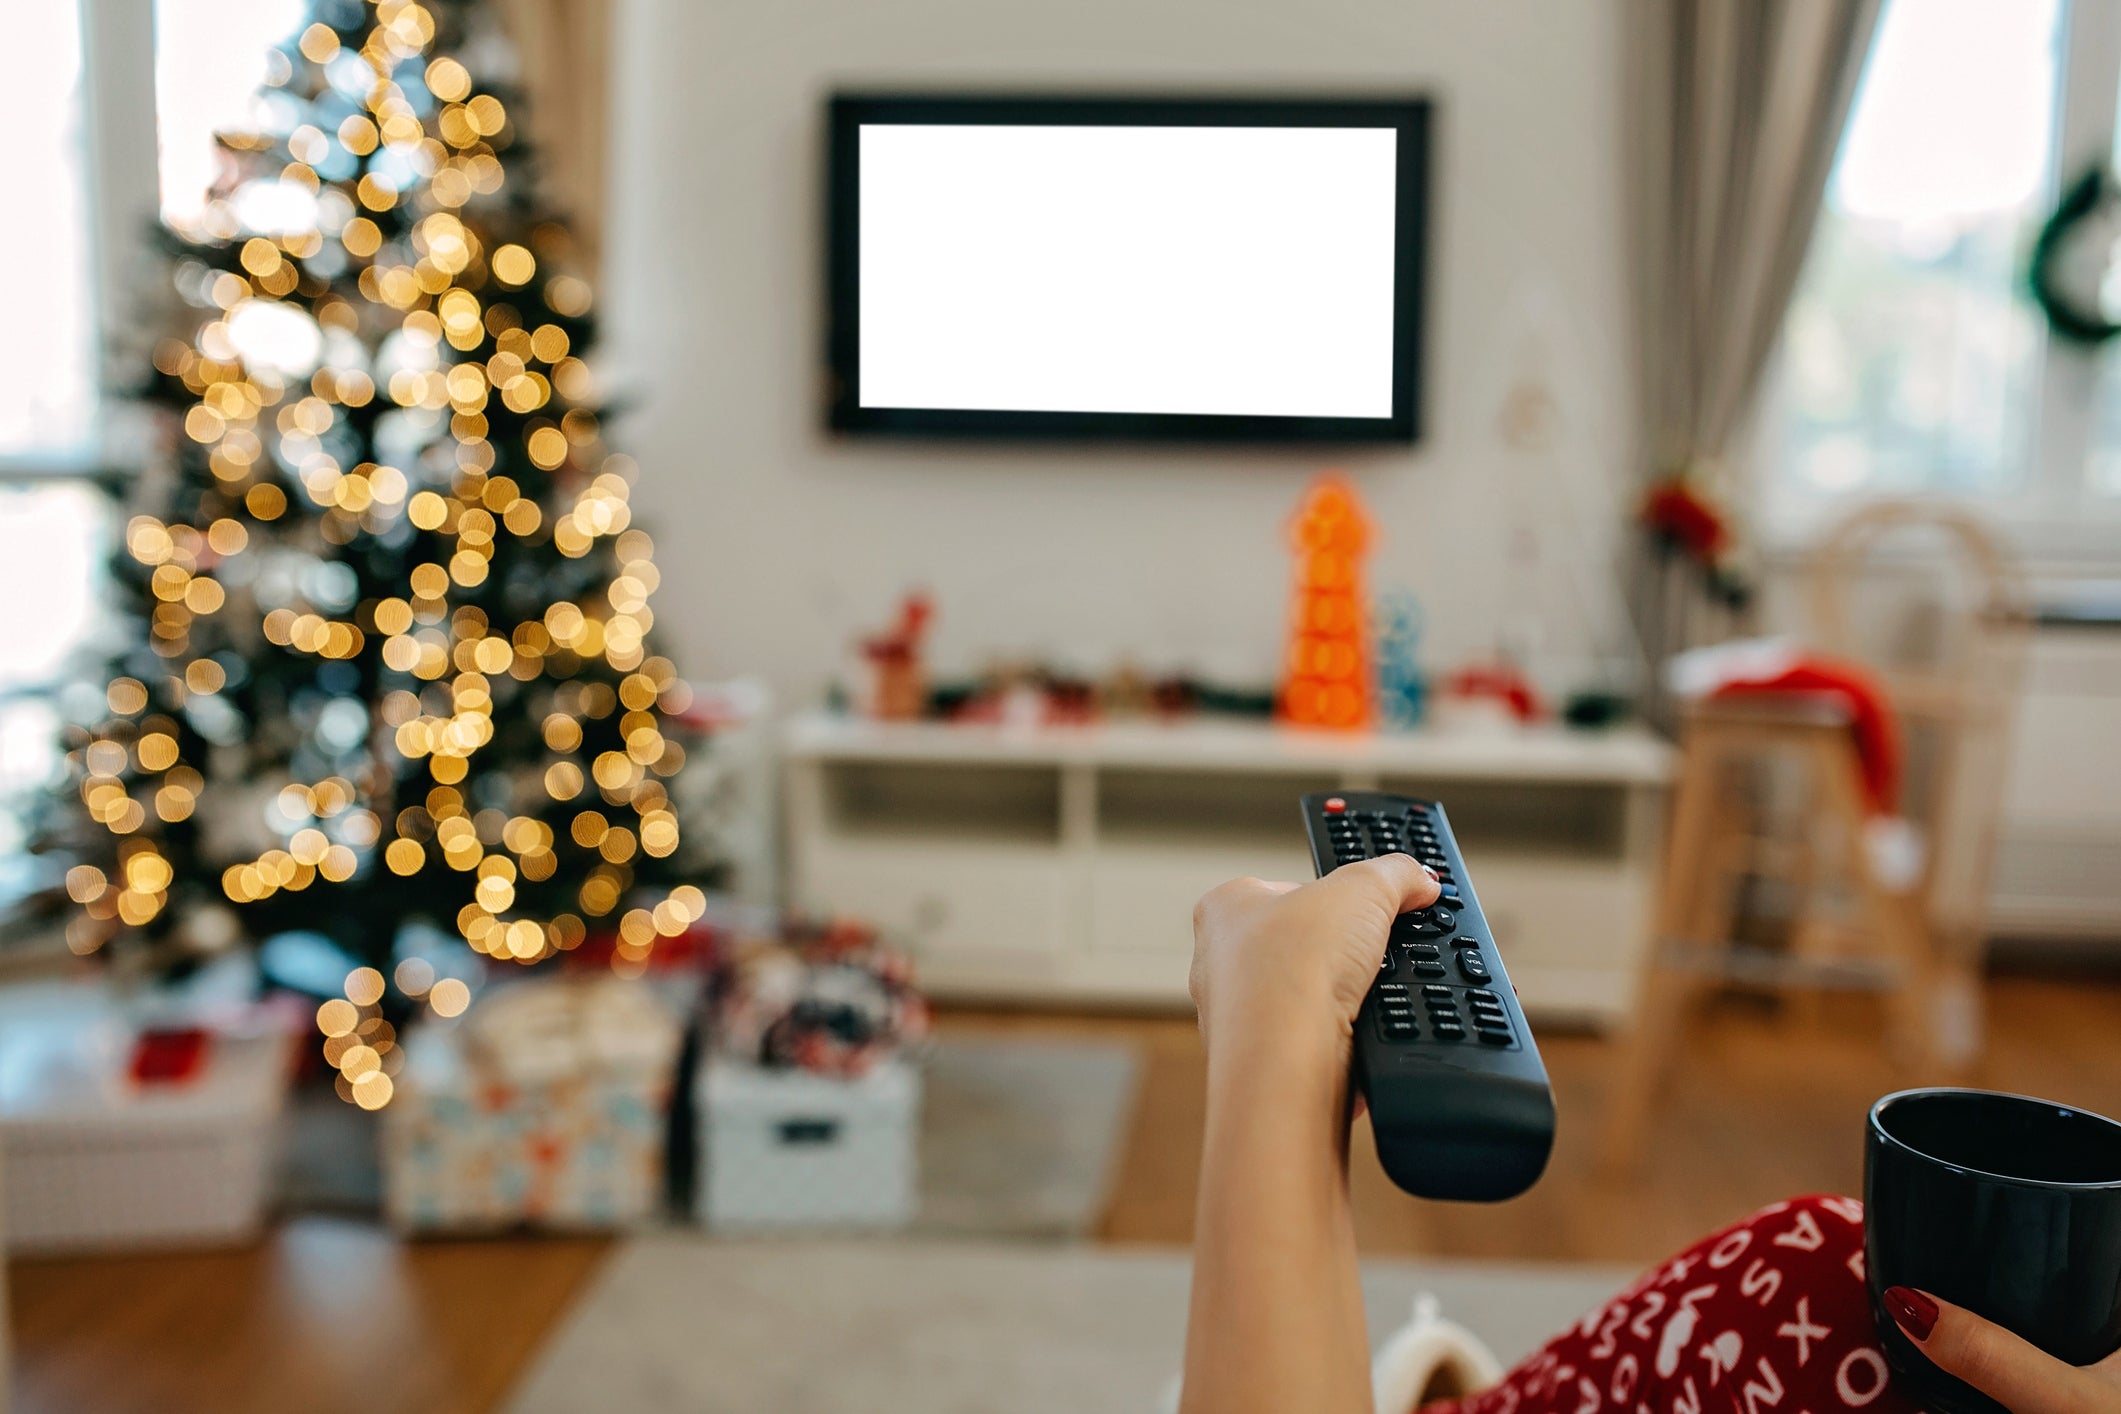 Luckily, the Christmas TV schedule has some potential hits